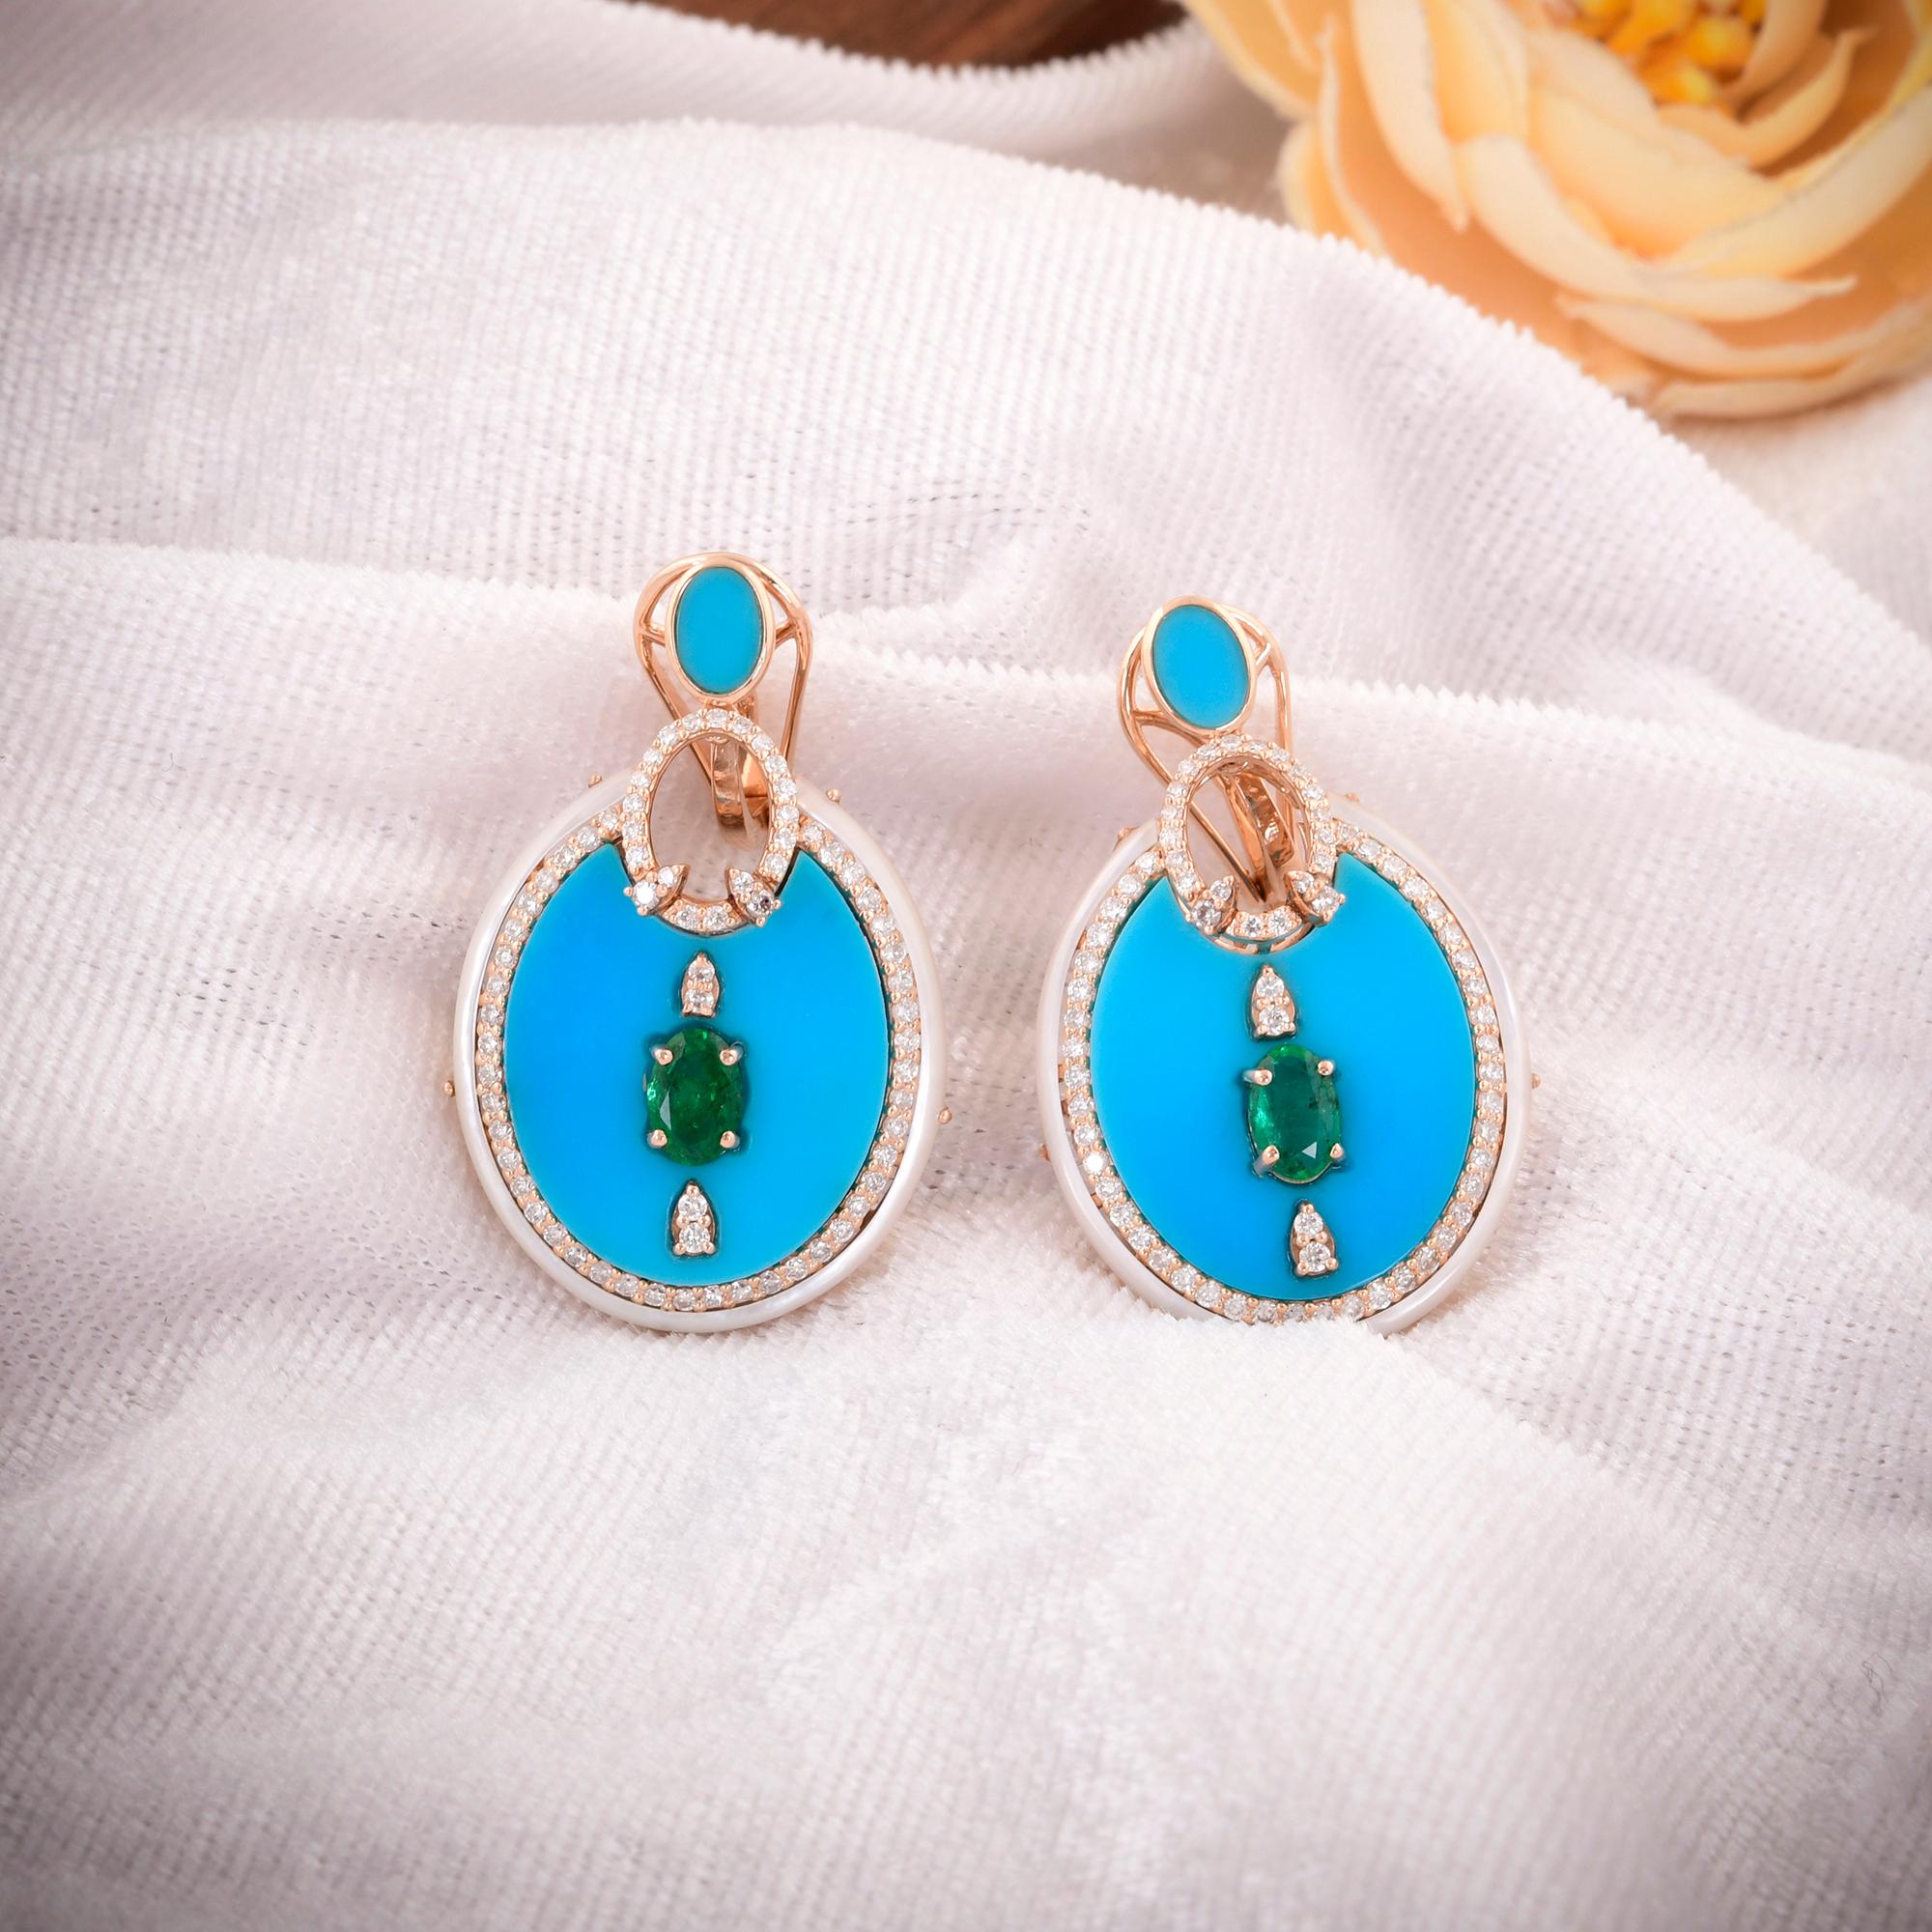 Adorn yourself with the captivating beauty of nature's treasures with these stunning Turquoise Mother of Pearl Dangle Earrings, accented by radiant Emeralds and Diamonds, all set in exquisite 14 Karat Rose Gold. These earrings are a true celebration